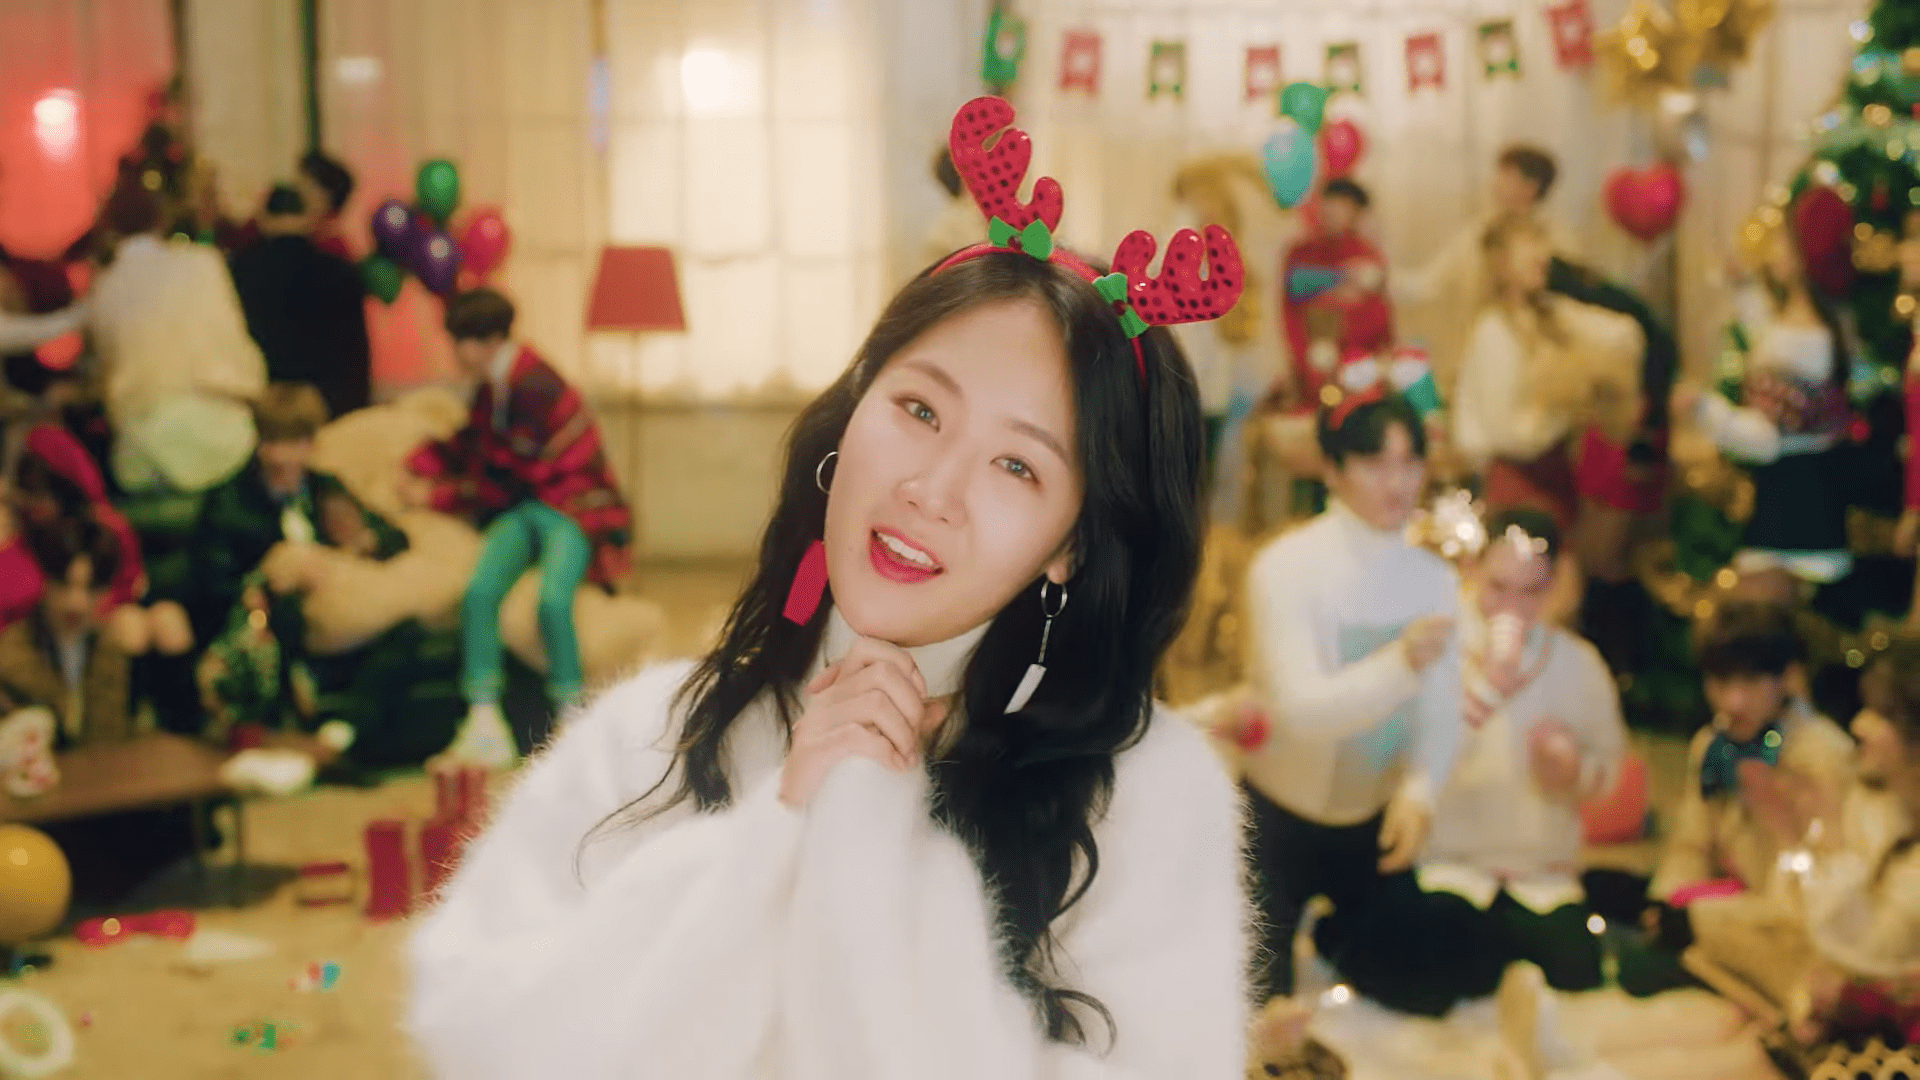 WATCH Starship Drops Teaser Video For "Christmas Day" MV What